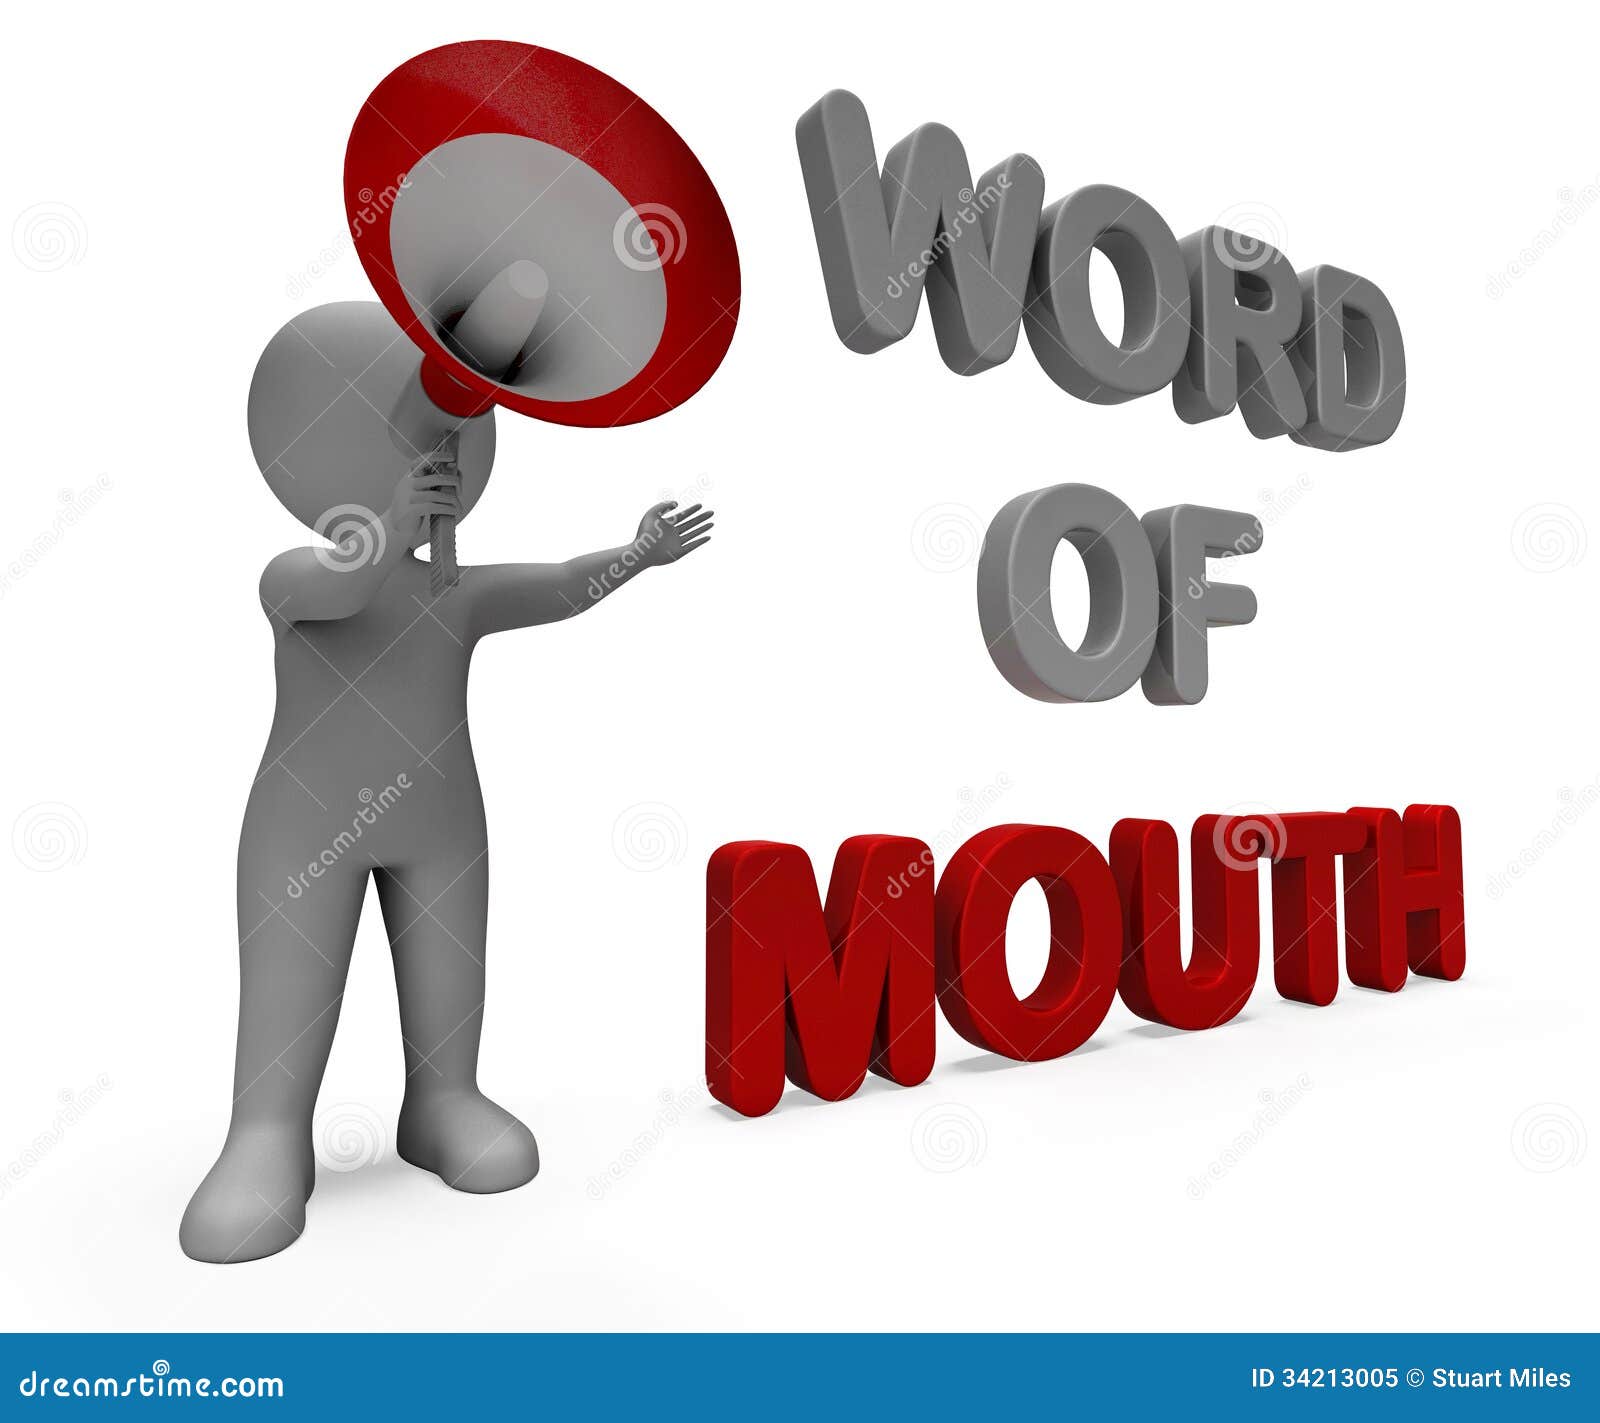 word of mouth character shows communication networking discussing or buzz